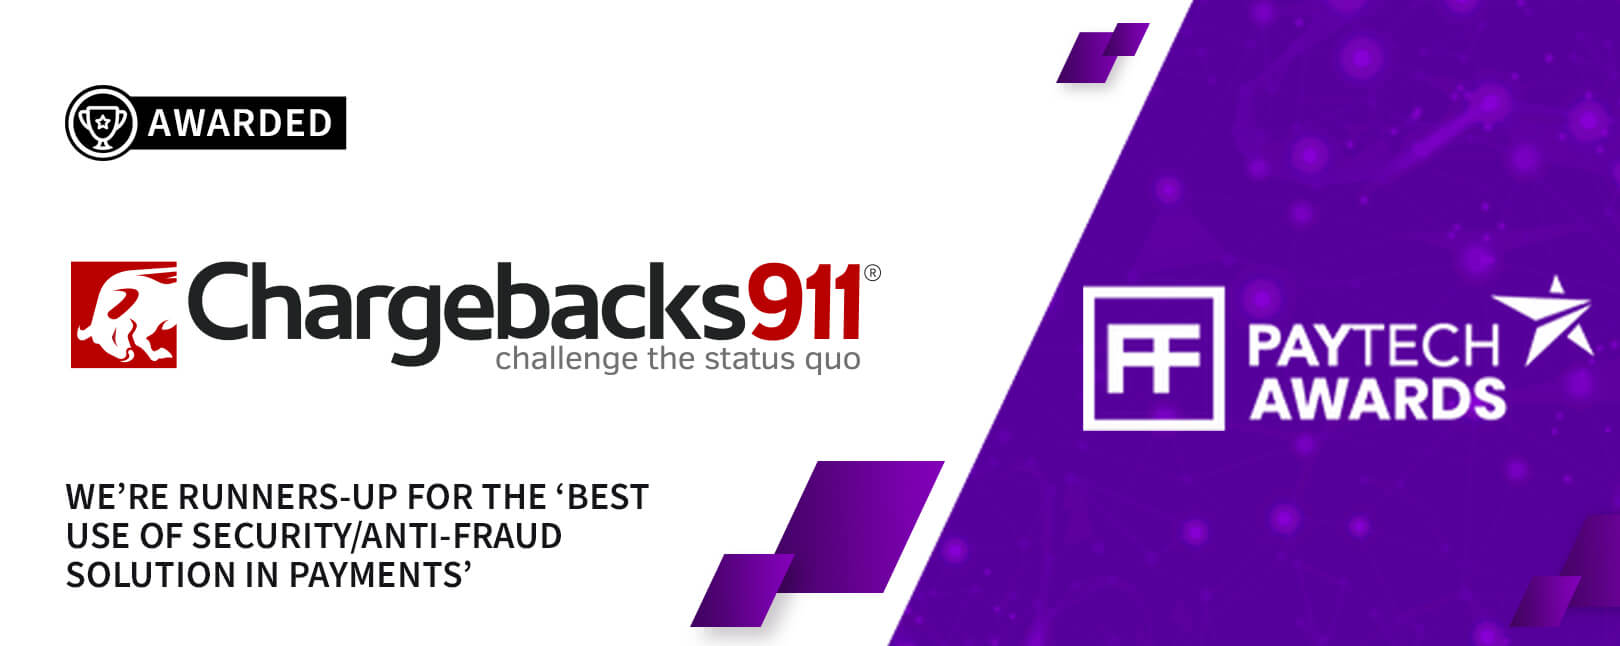 Chargebacks911® Gets the Nod as ‘Best Use of Security/Anti-Fraud Solution’